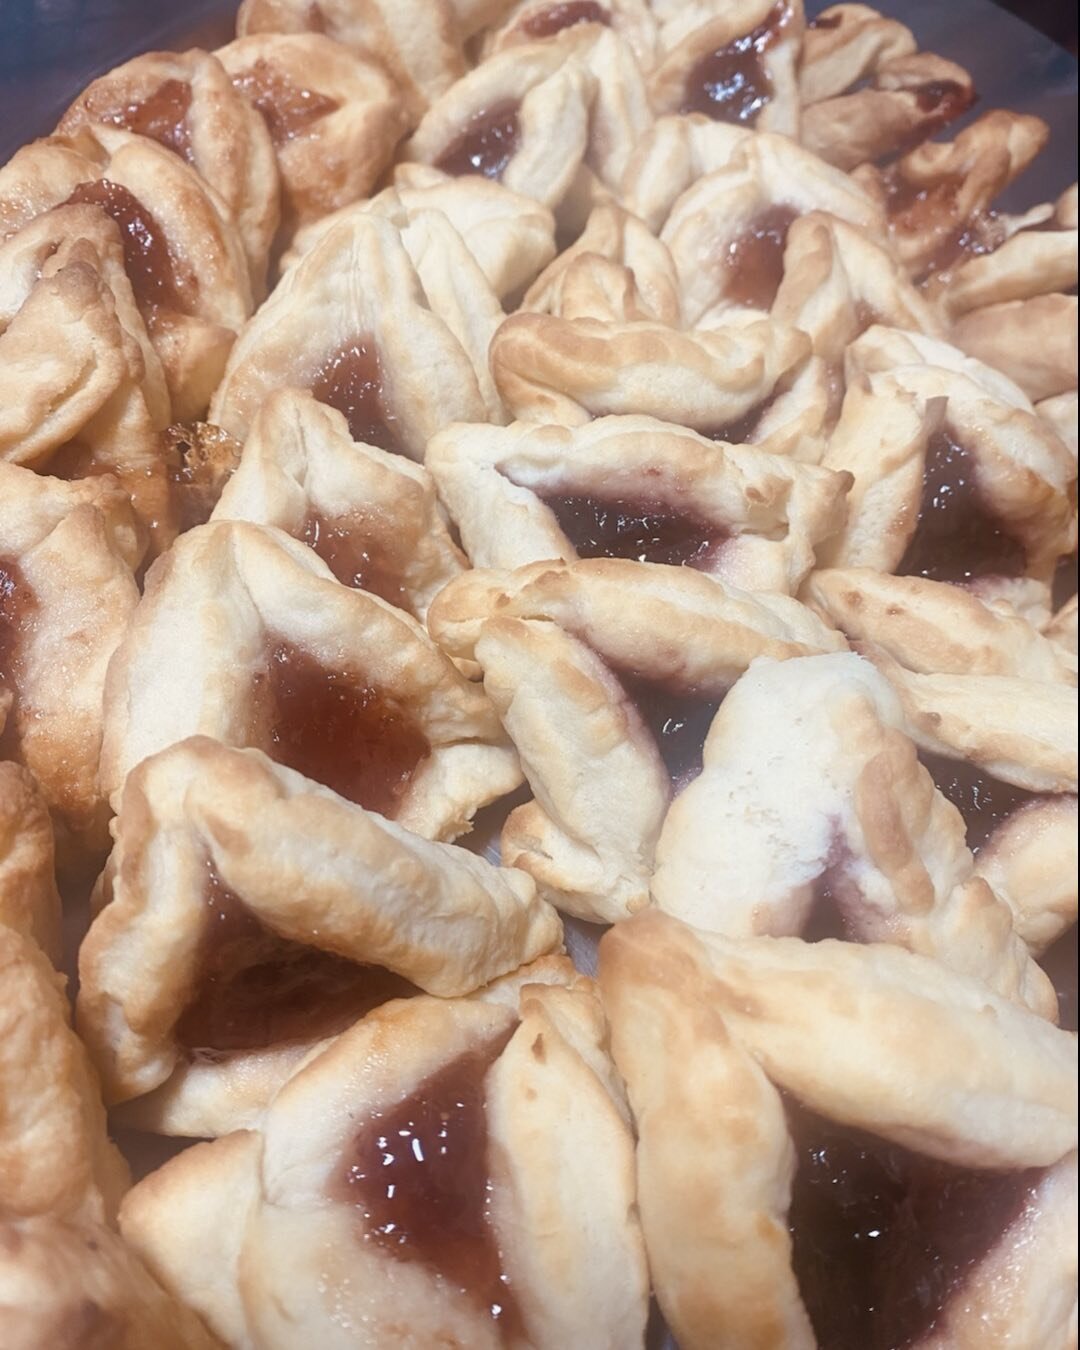 Beit T&rsquo;Shuvah bakers in the kitchen making over 200 Hamantaschen for our Purim celebration tonight. Brings new meaning to &ldquo;I&rsquo;ll eat my hat&rdquo;